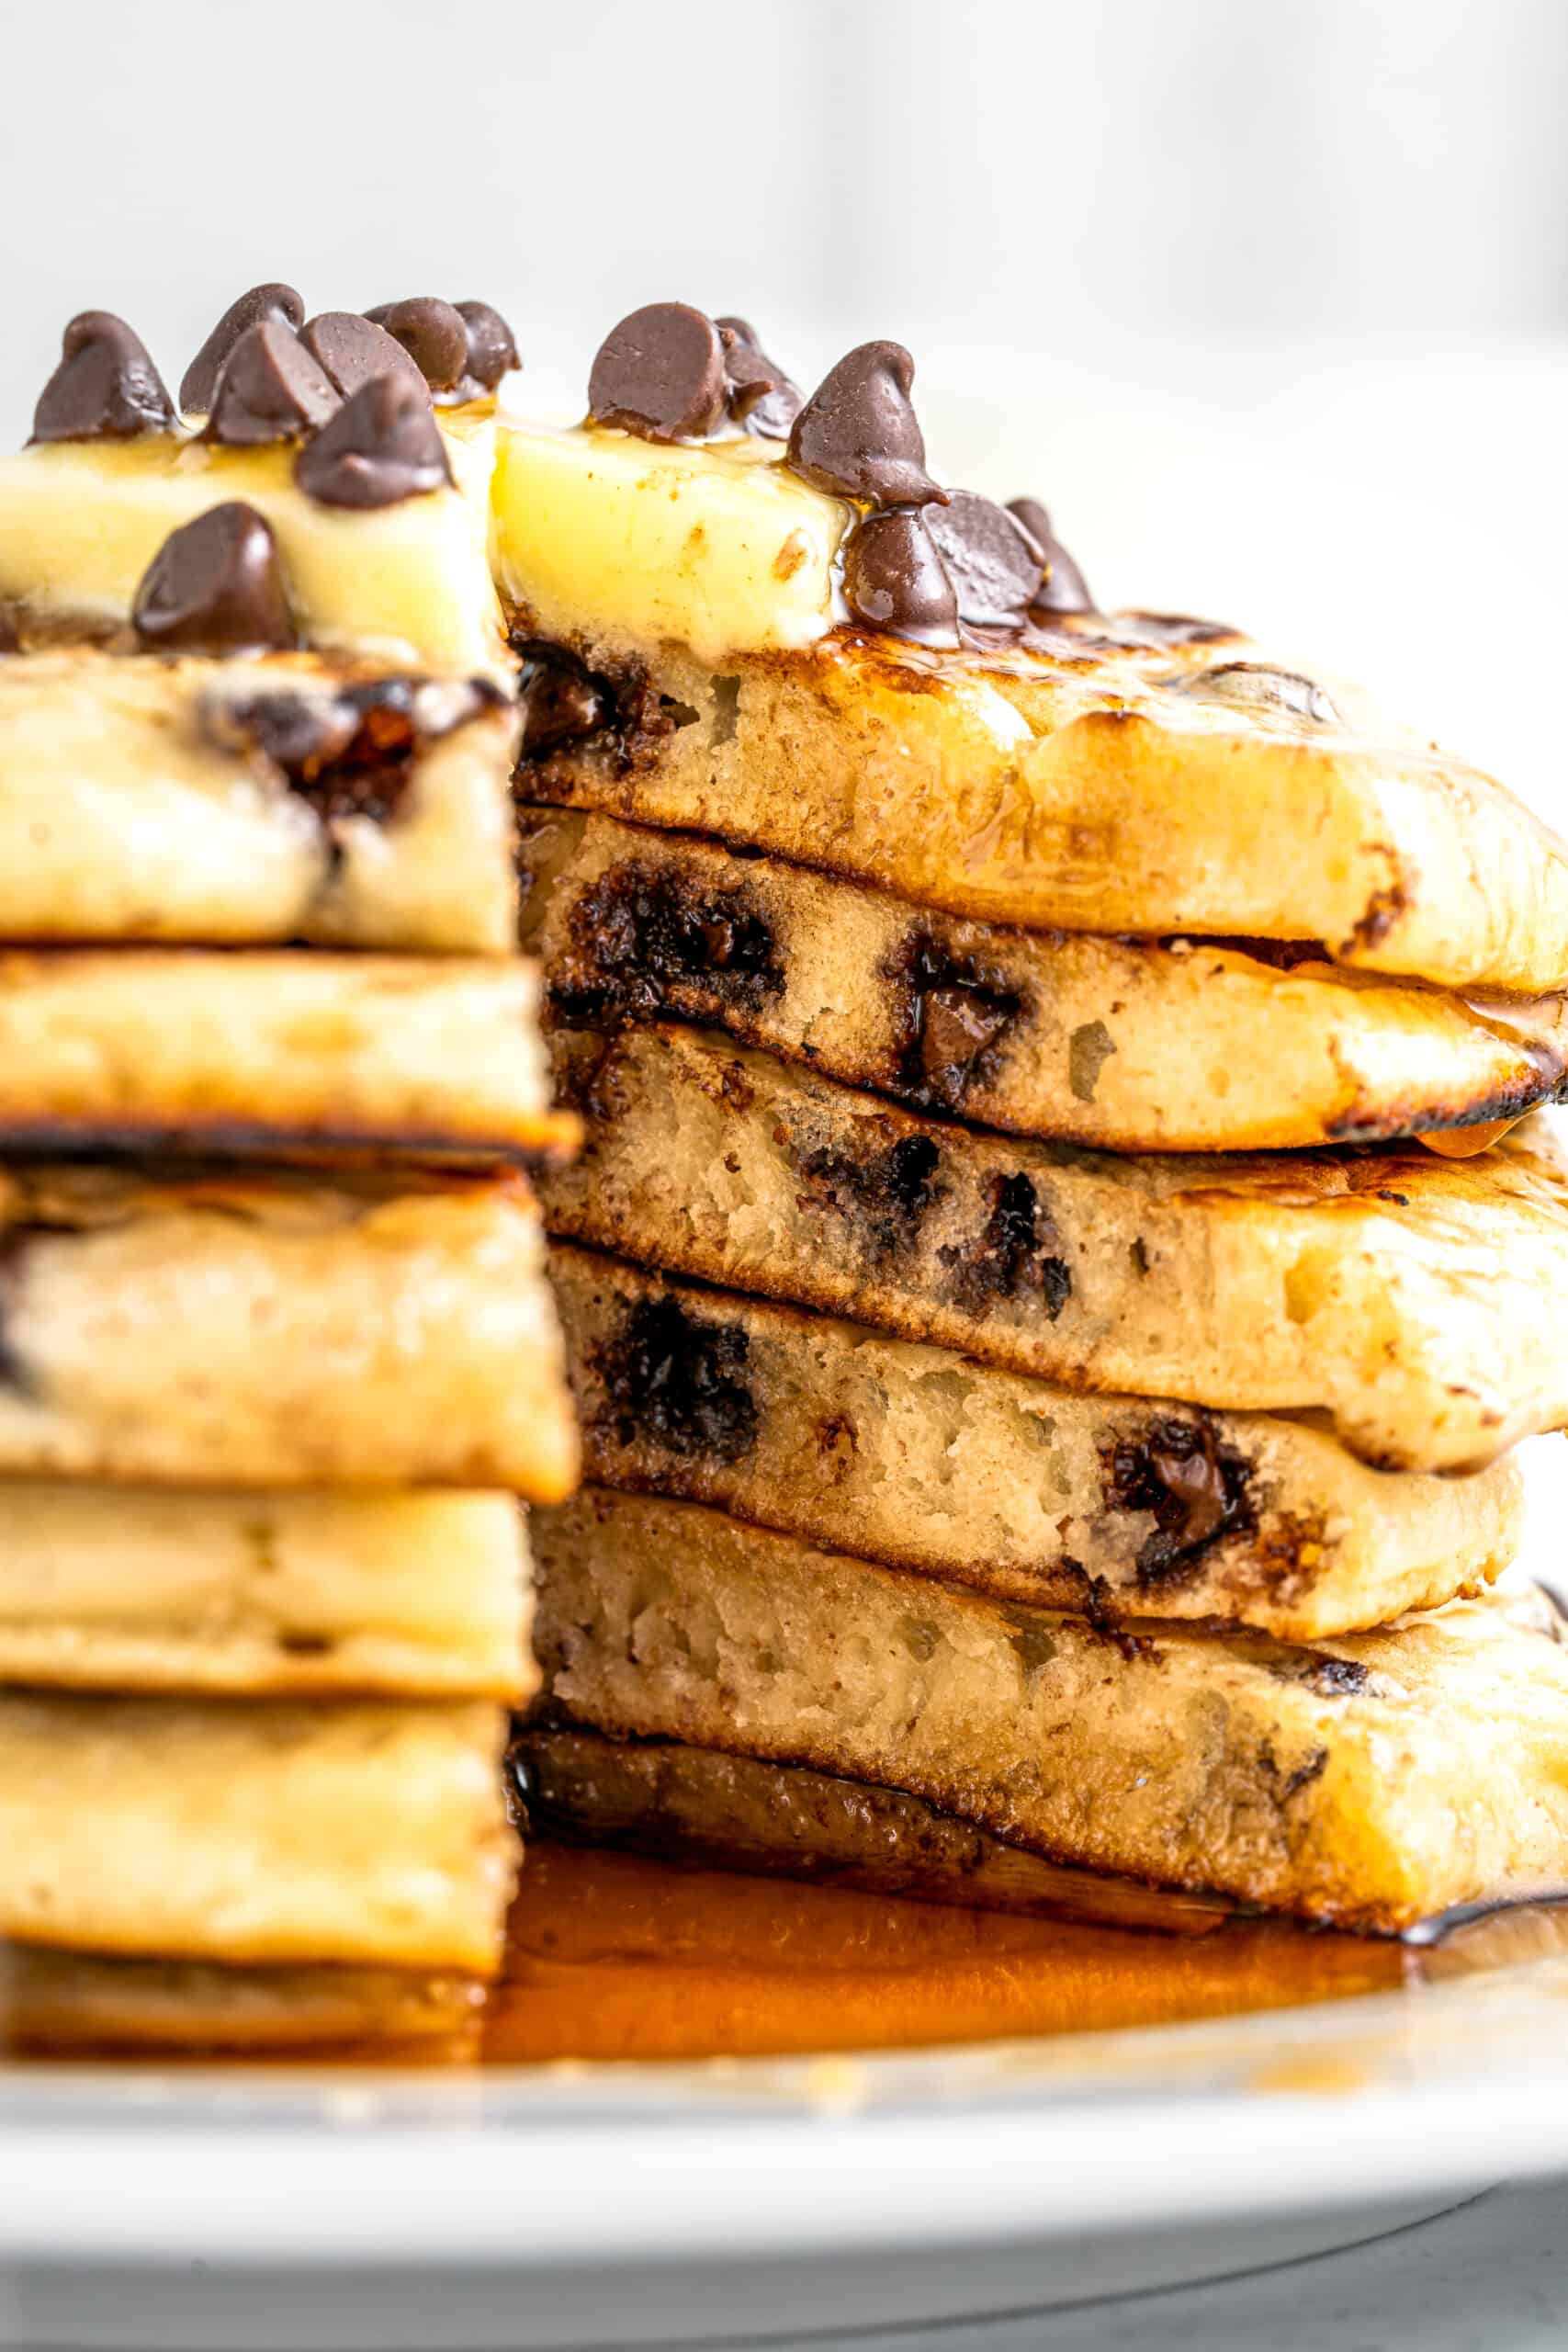 Chocolate Chip Pancakes | The Bewitchin' Kitchen